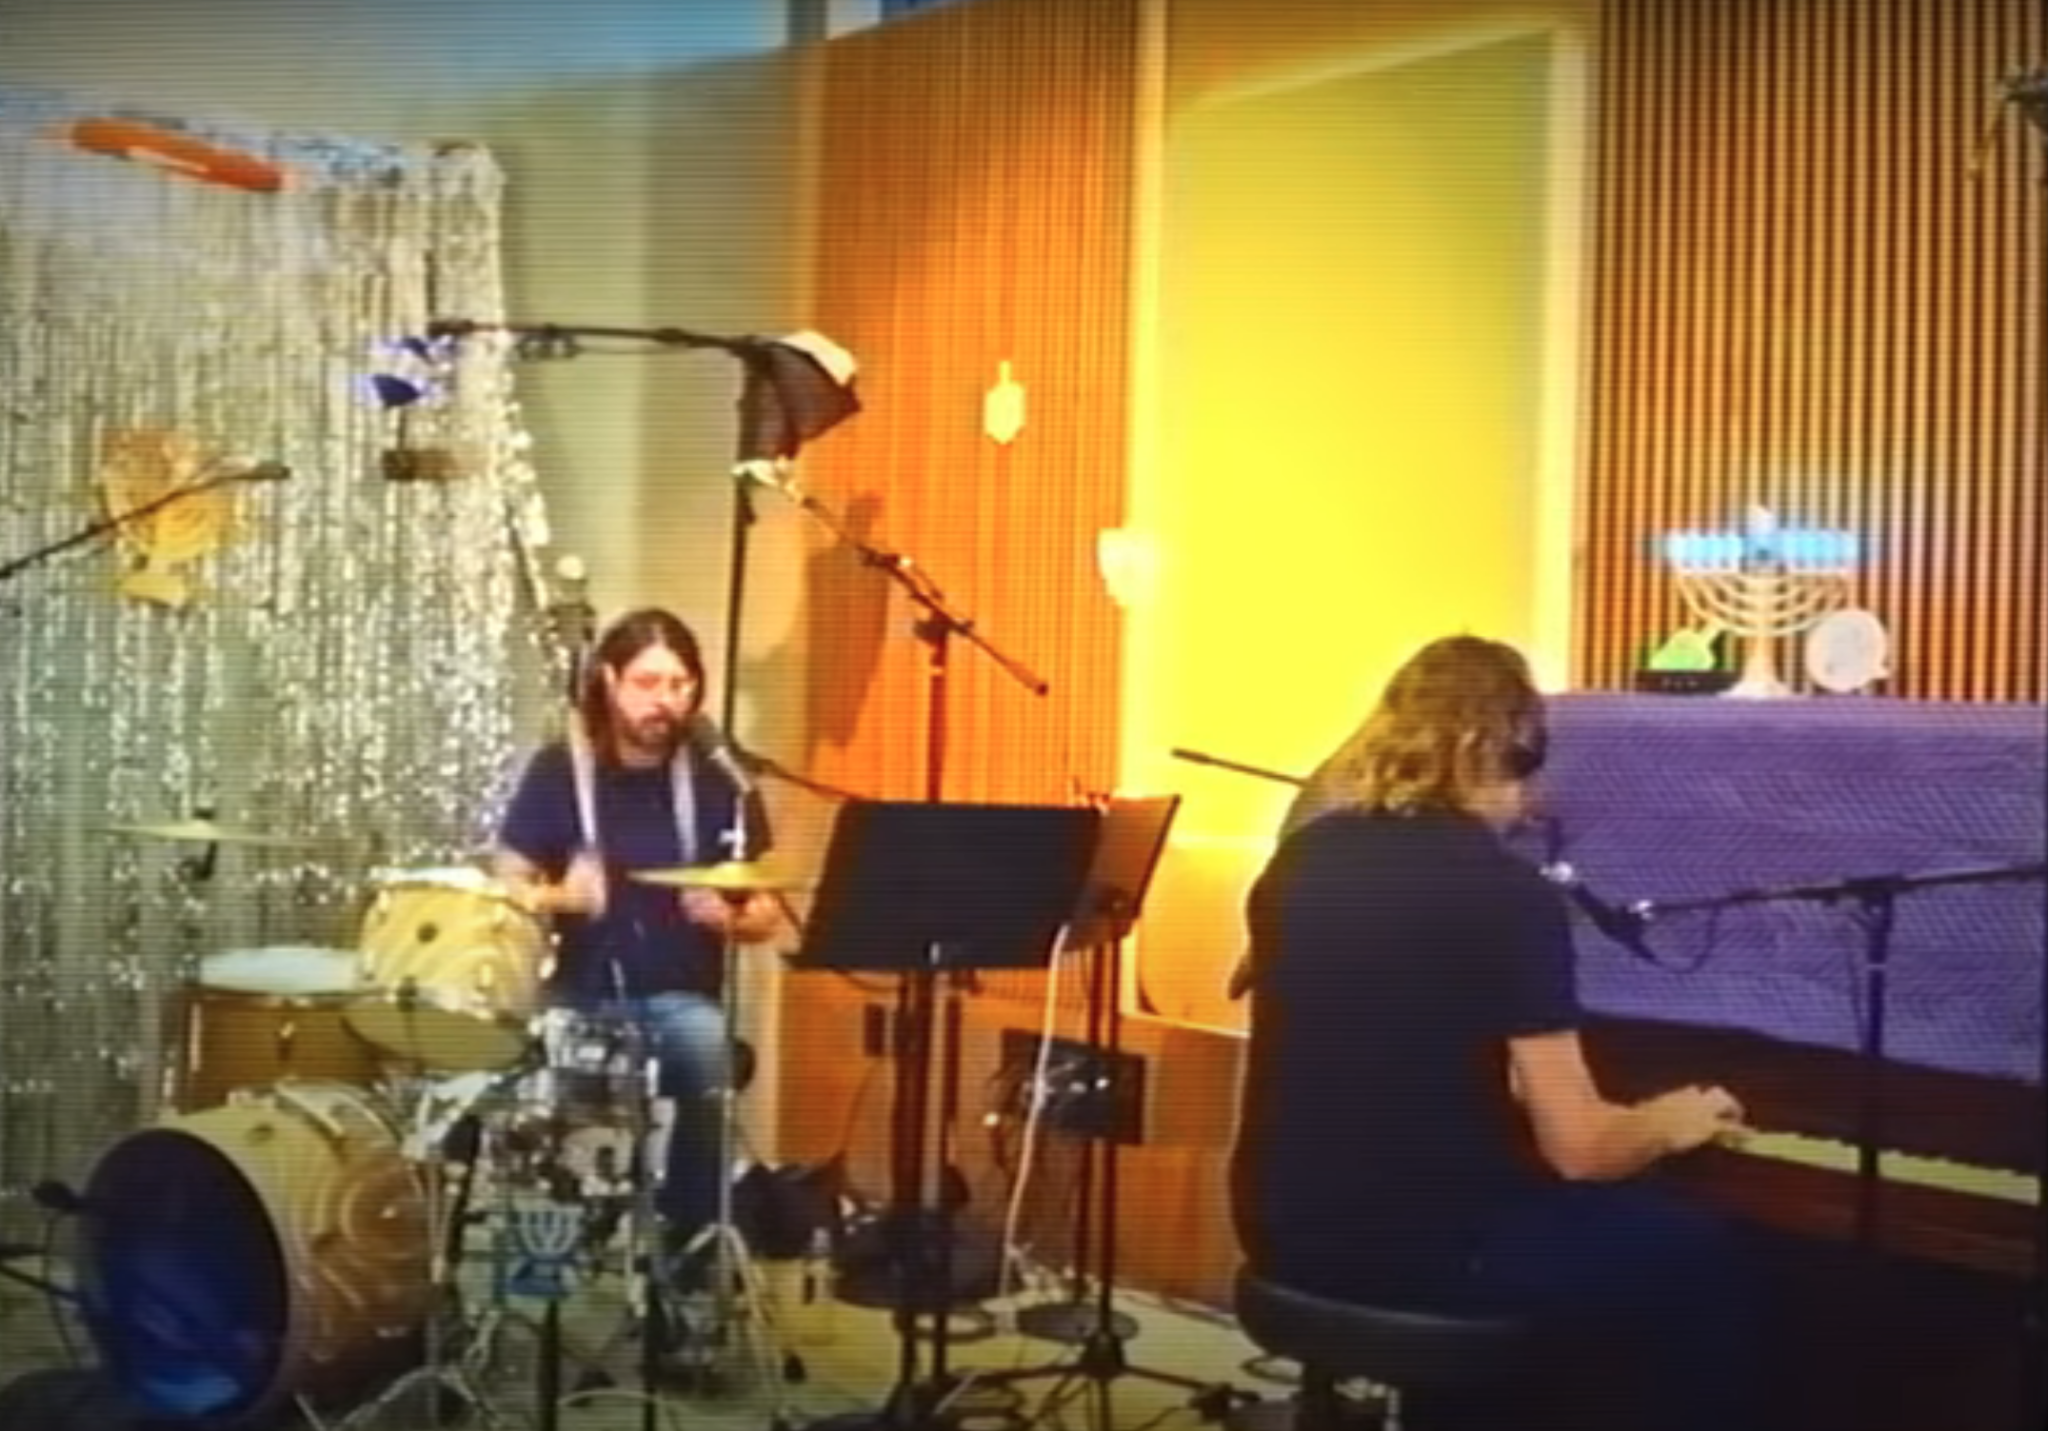 Dave Grohl and Greg Kurstin Cover The Clash for Latest Hanukkah Sessions Song